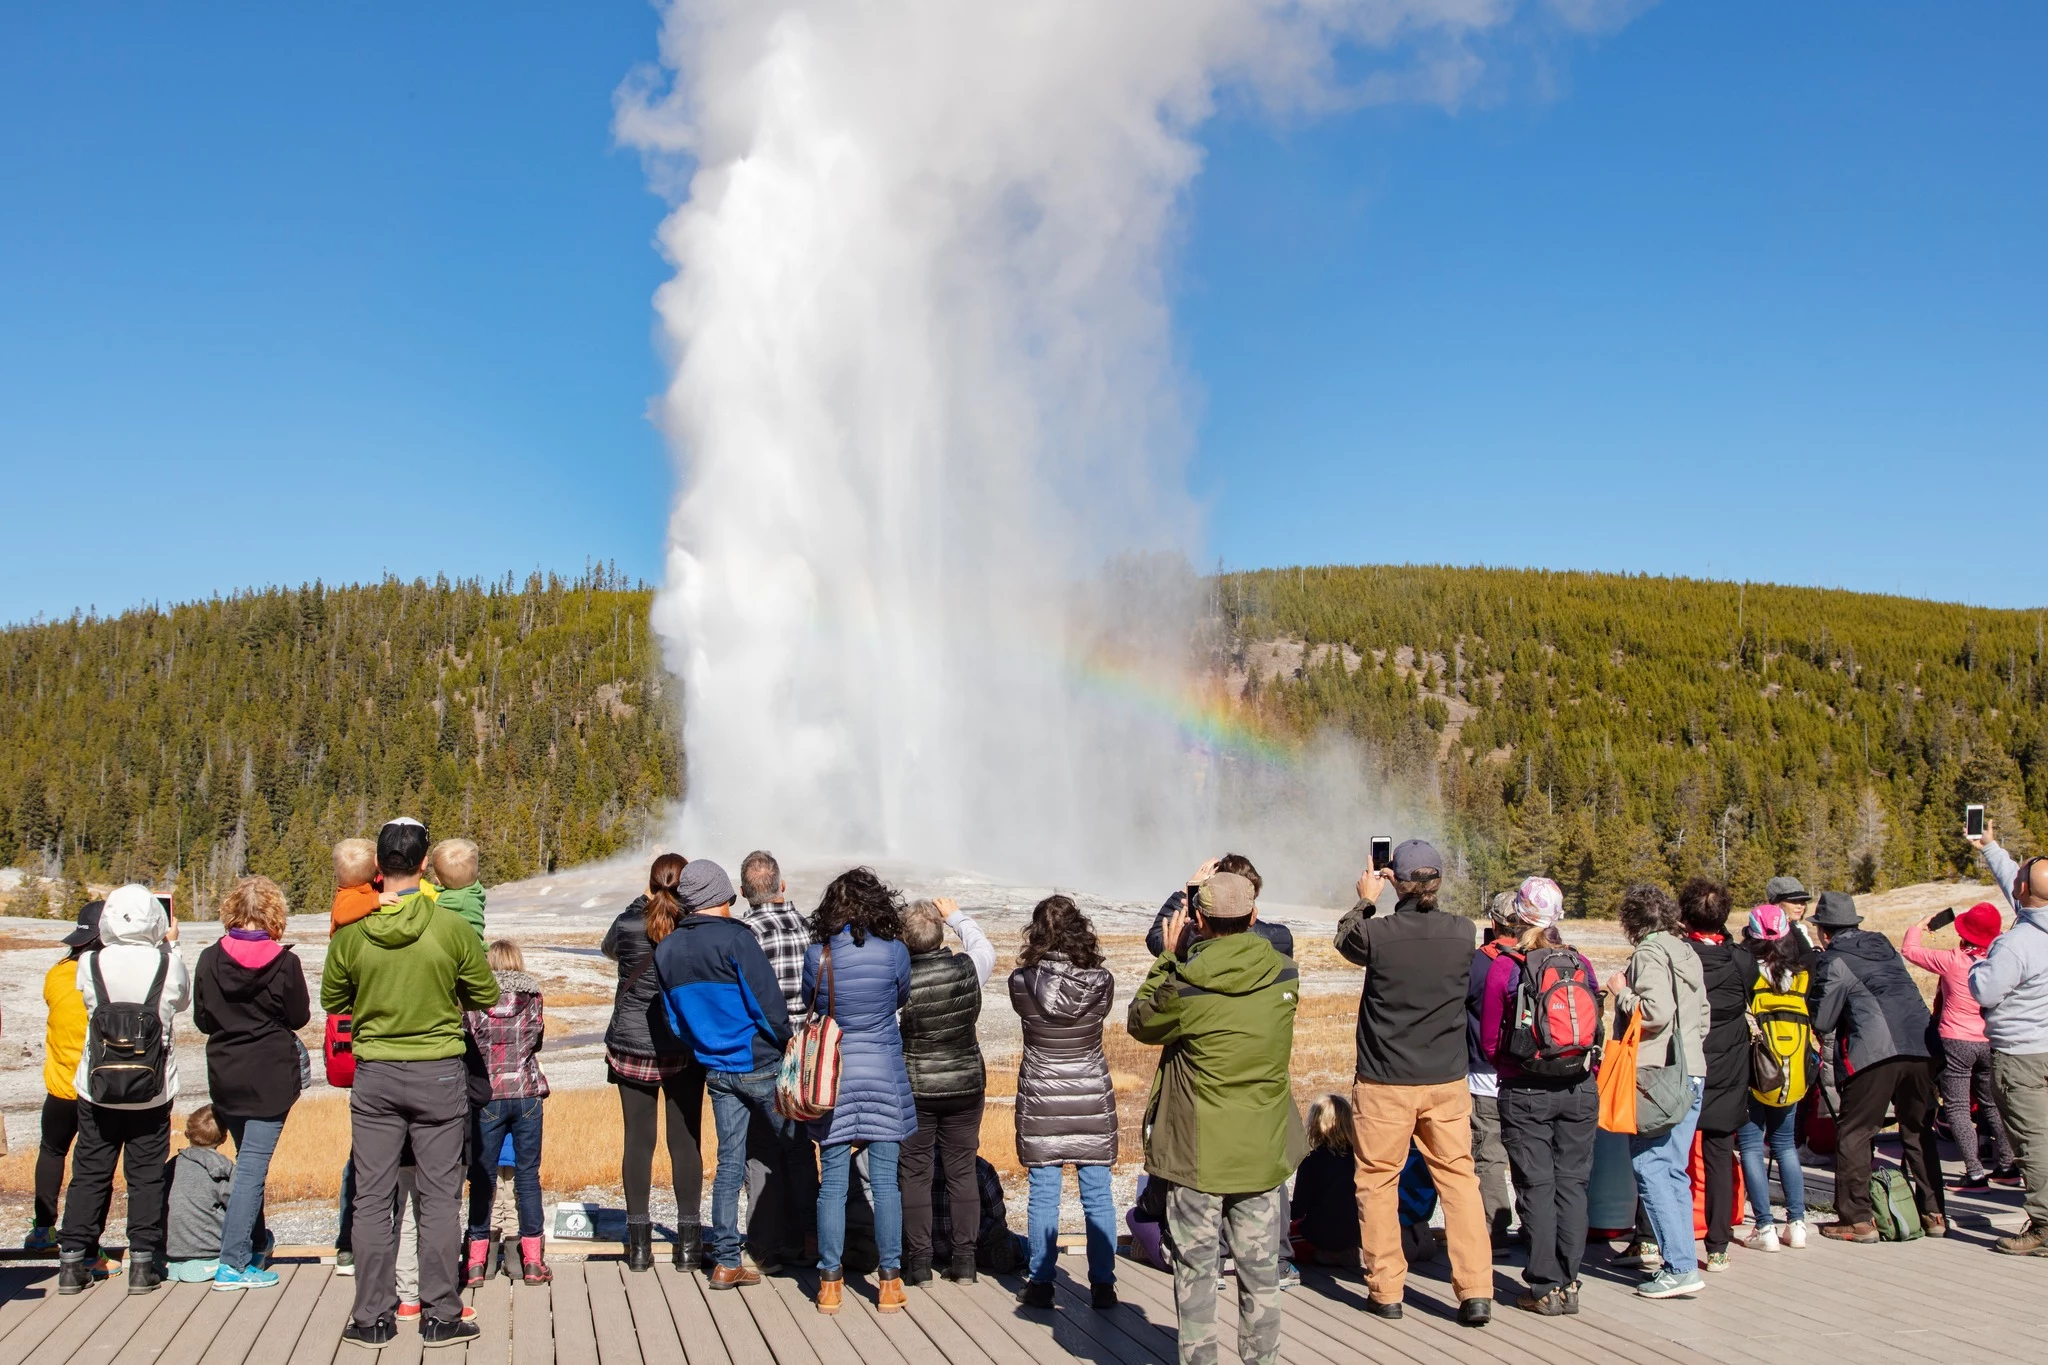 Yellowstone National Park Is Closed But For How Long?